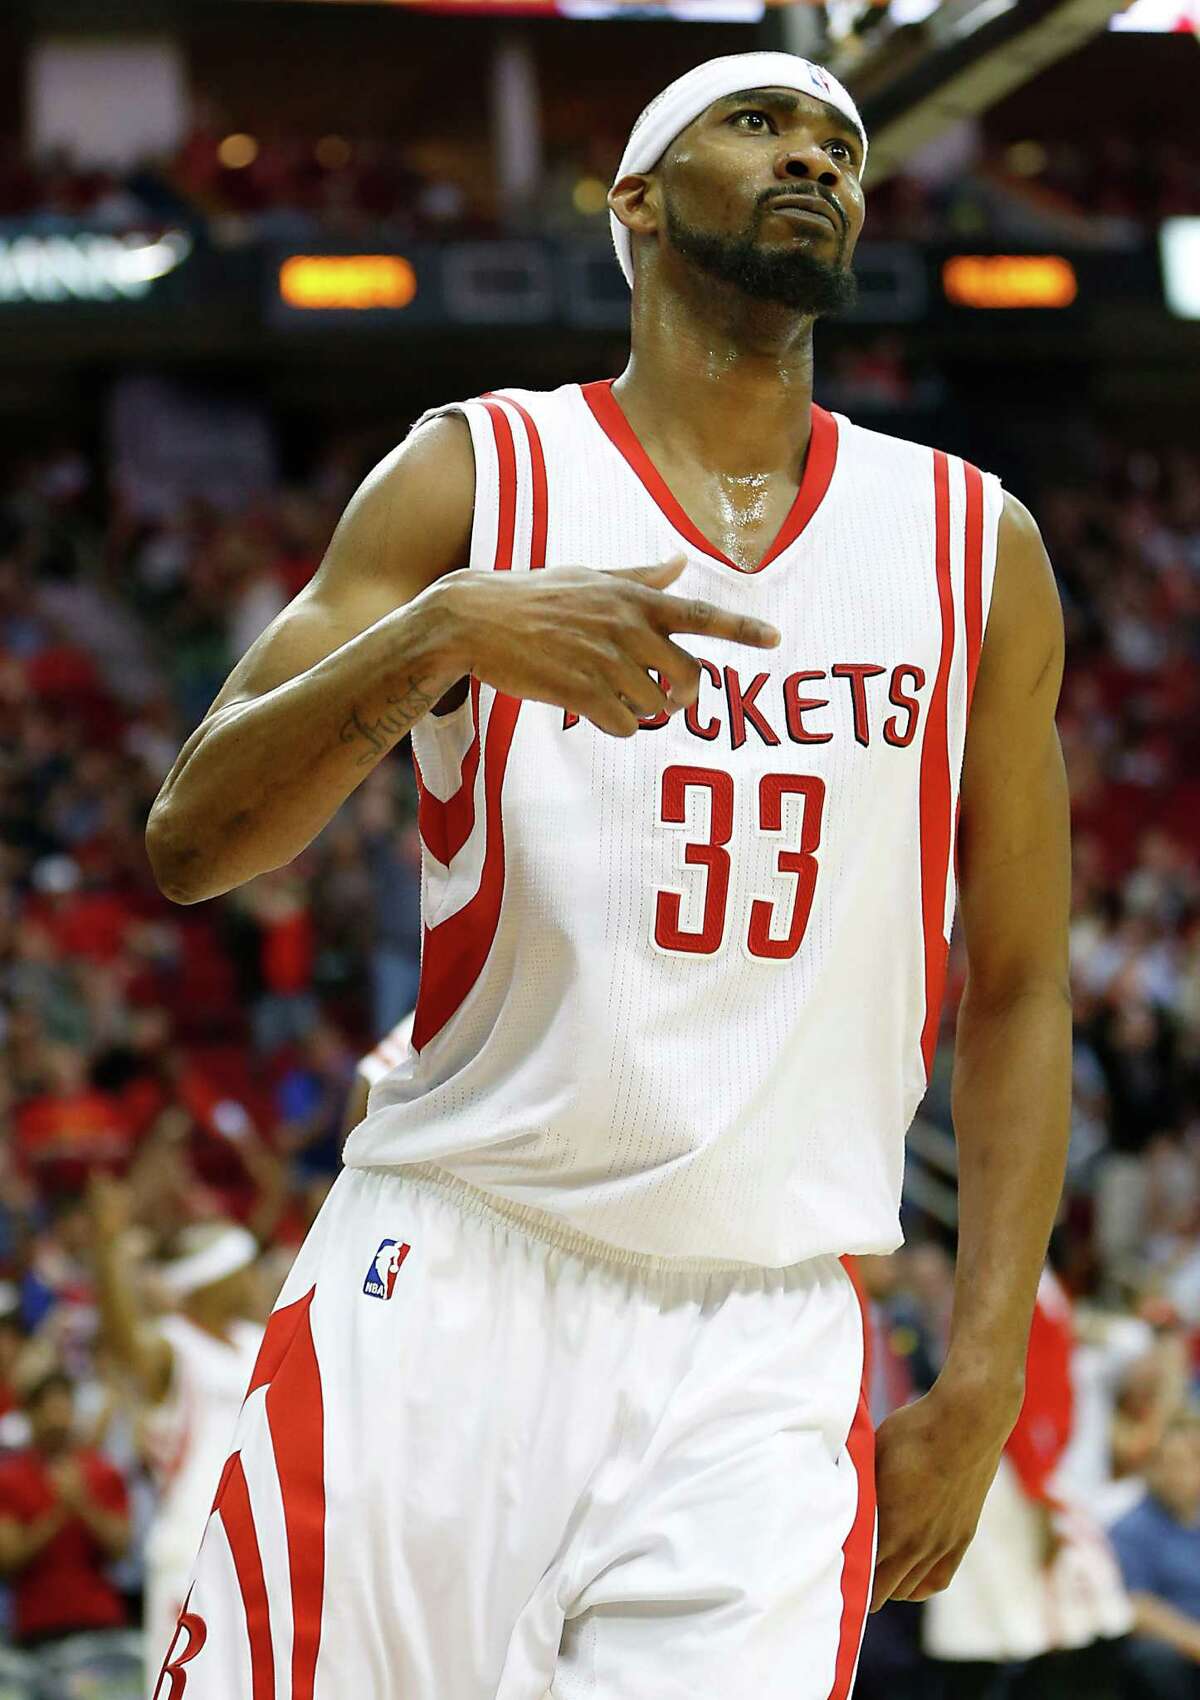 Reserve guard Corey Brewer had 20 points against the Pelicans, including 13 in the decisive fourth quarter.